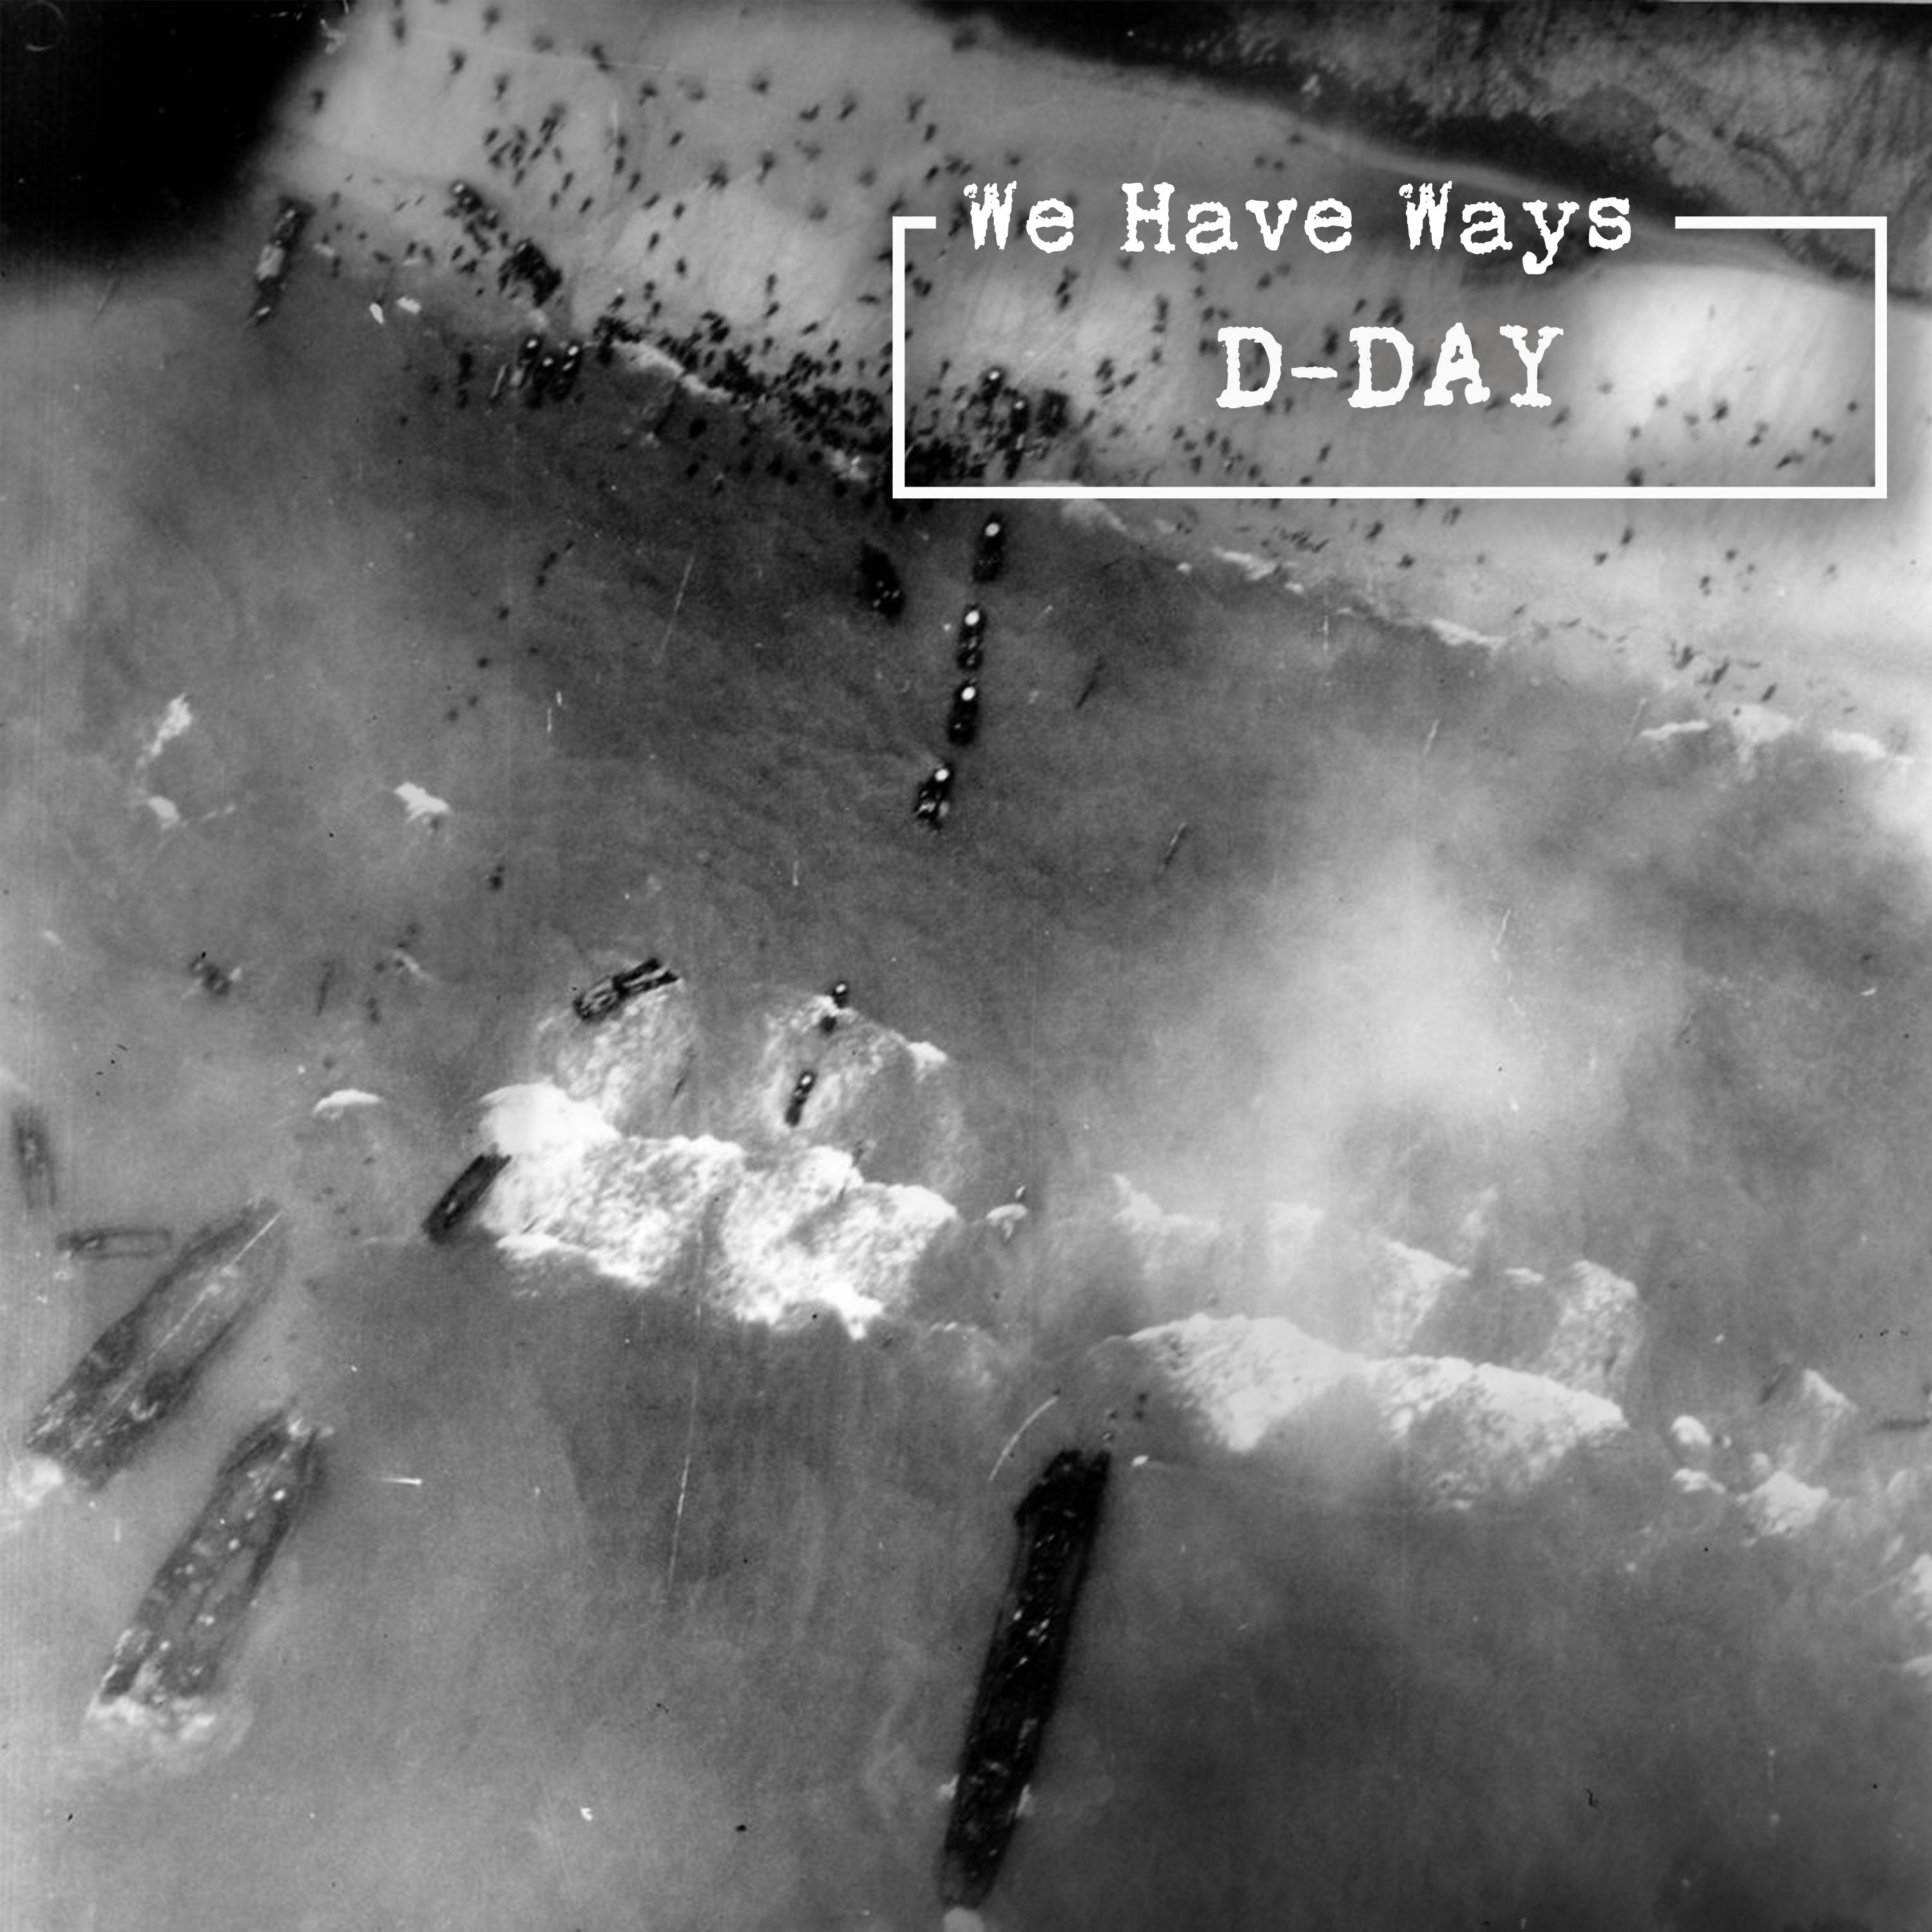 D-Day: The Beaches (Episode 5)